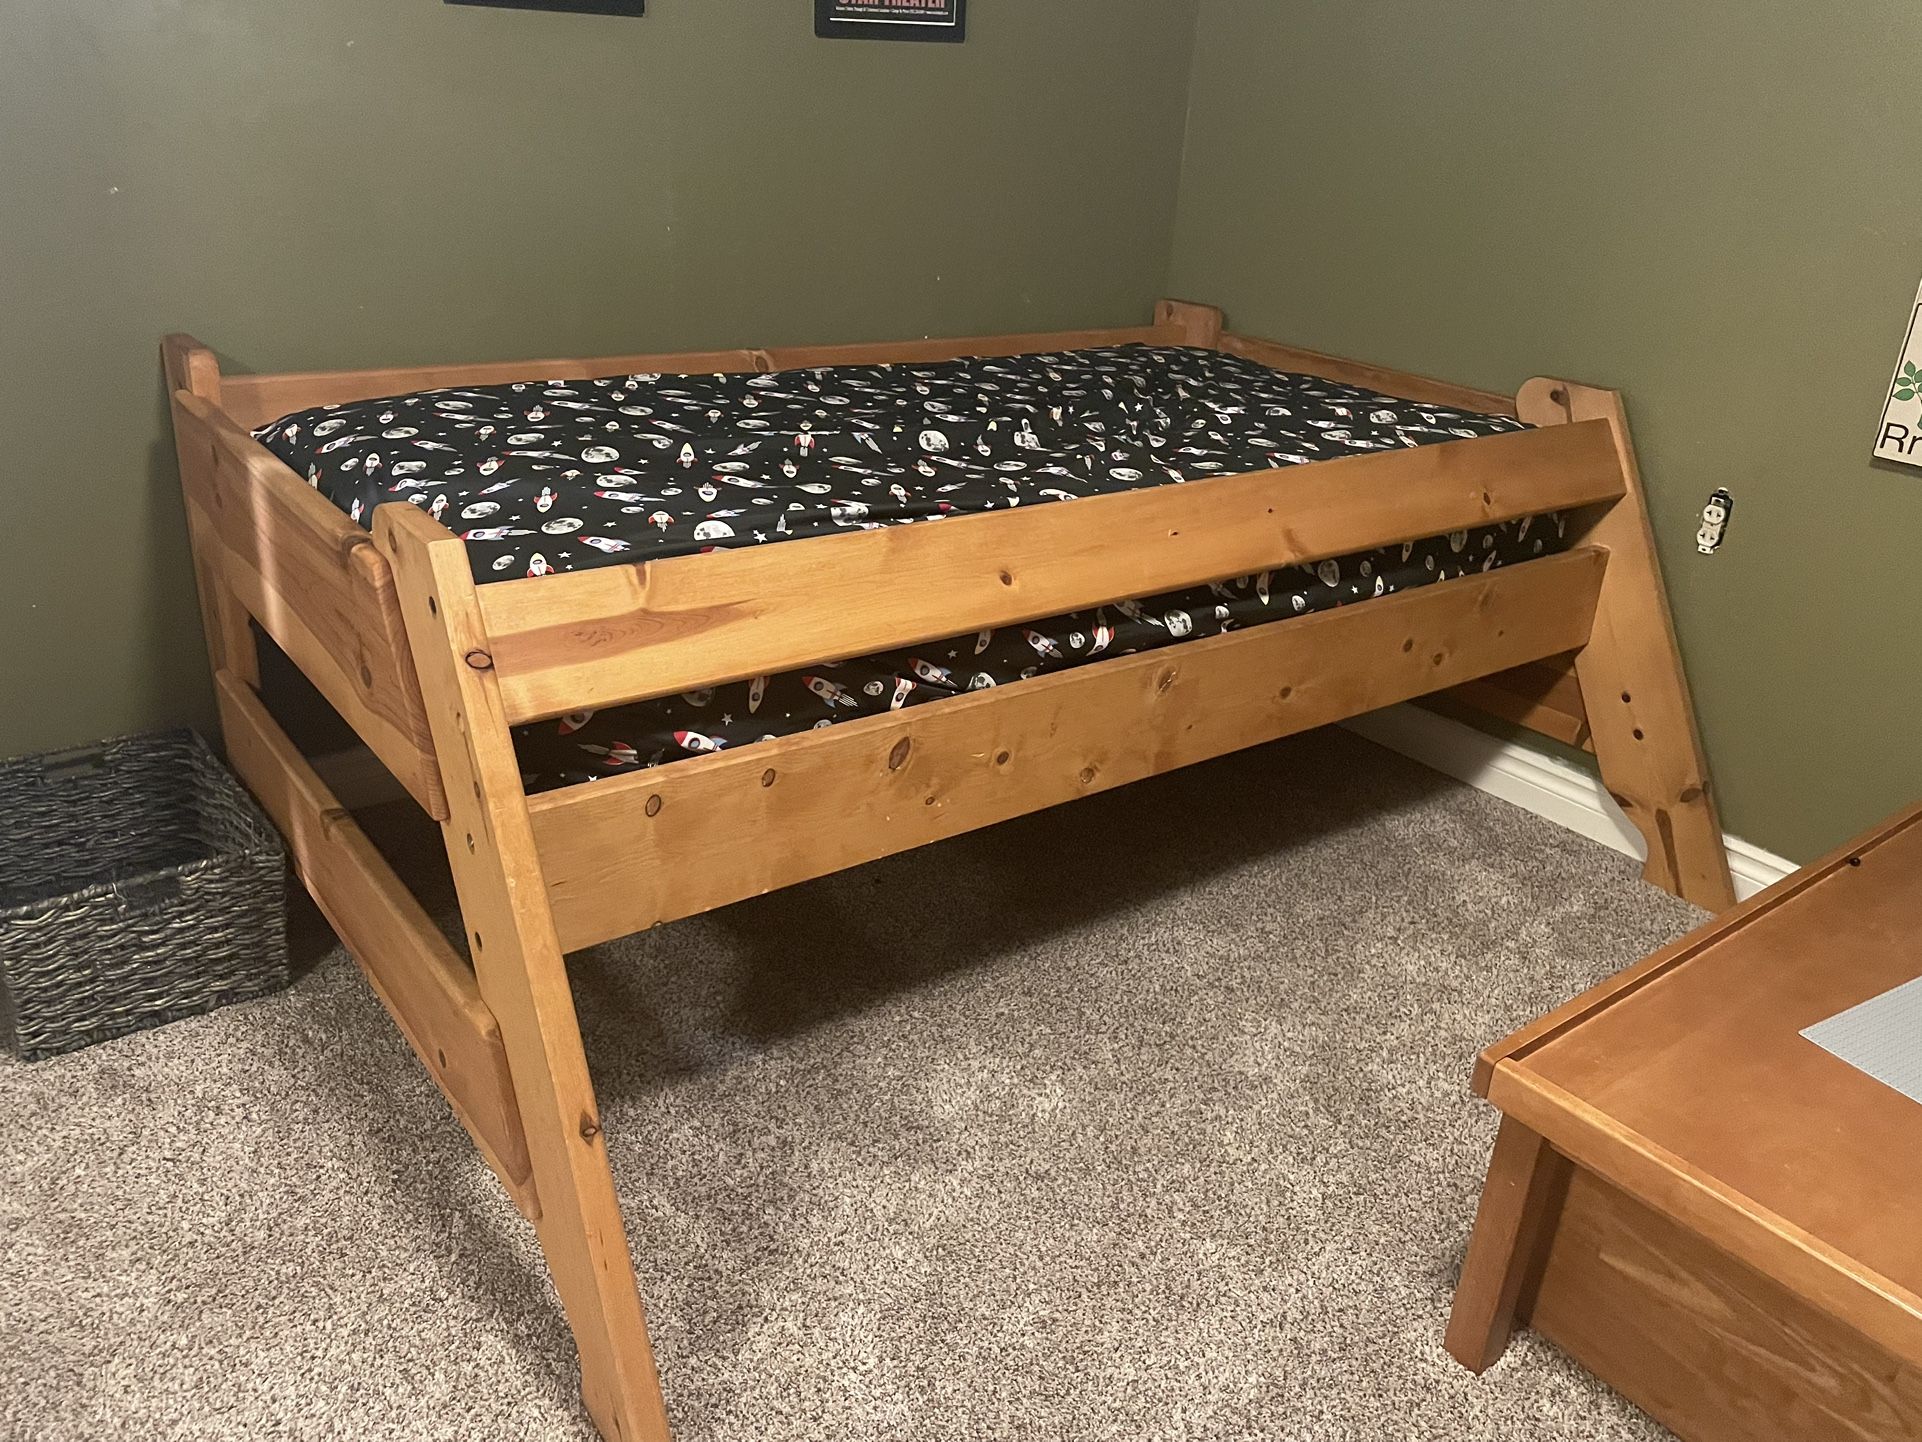 Double Bunk Bottom With Single Top Bunk